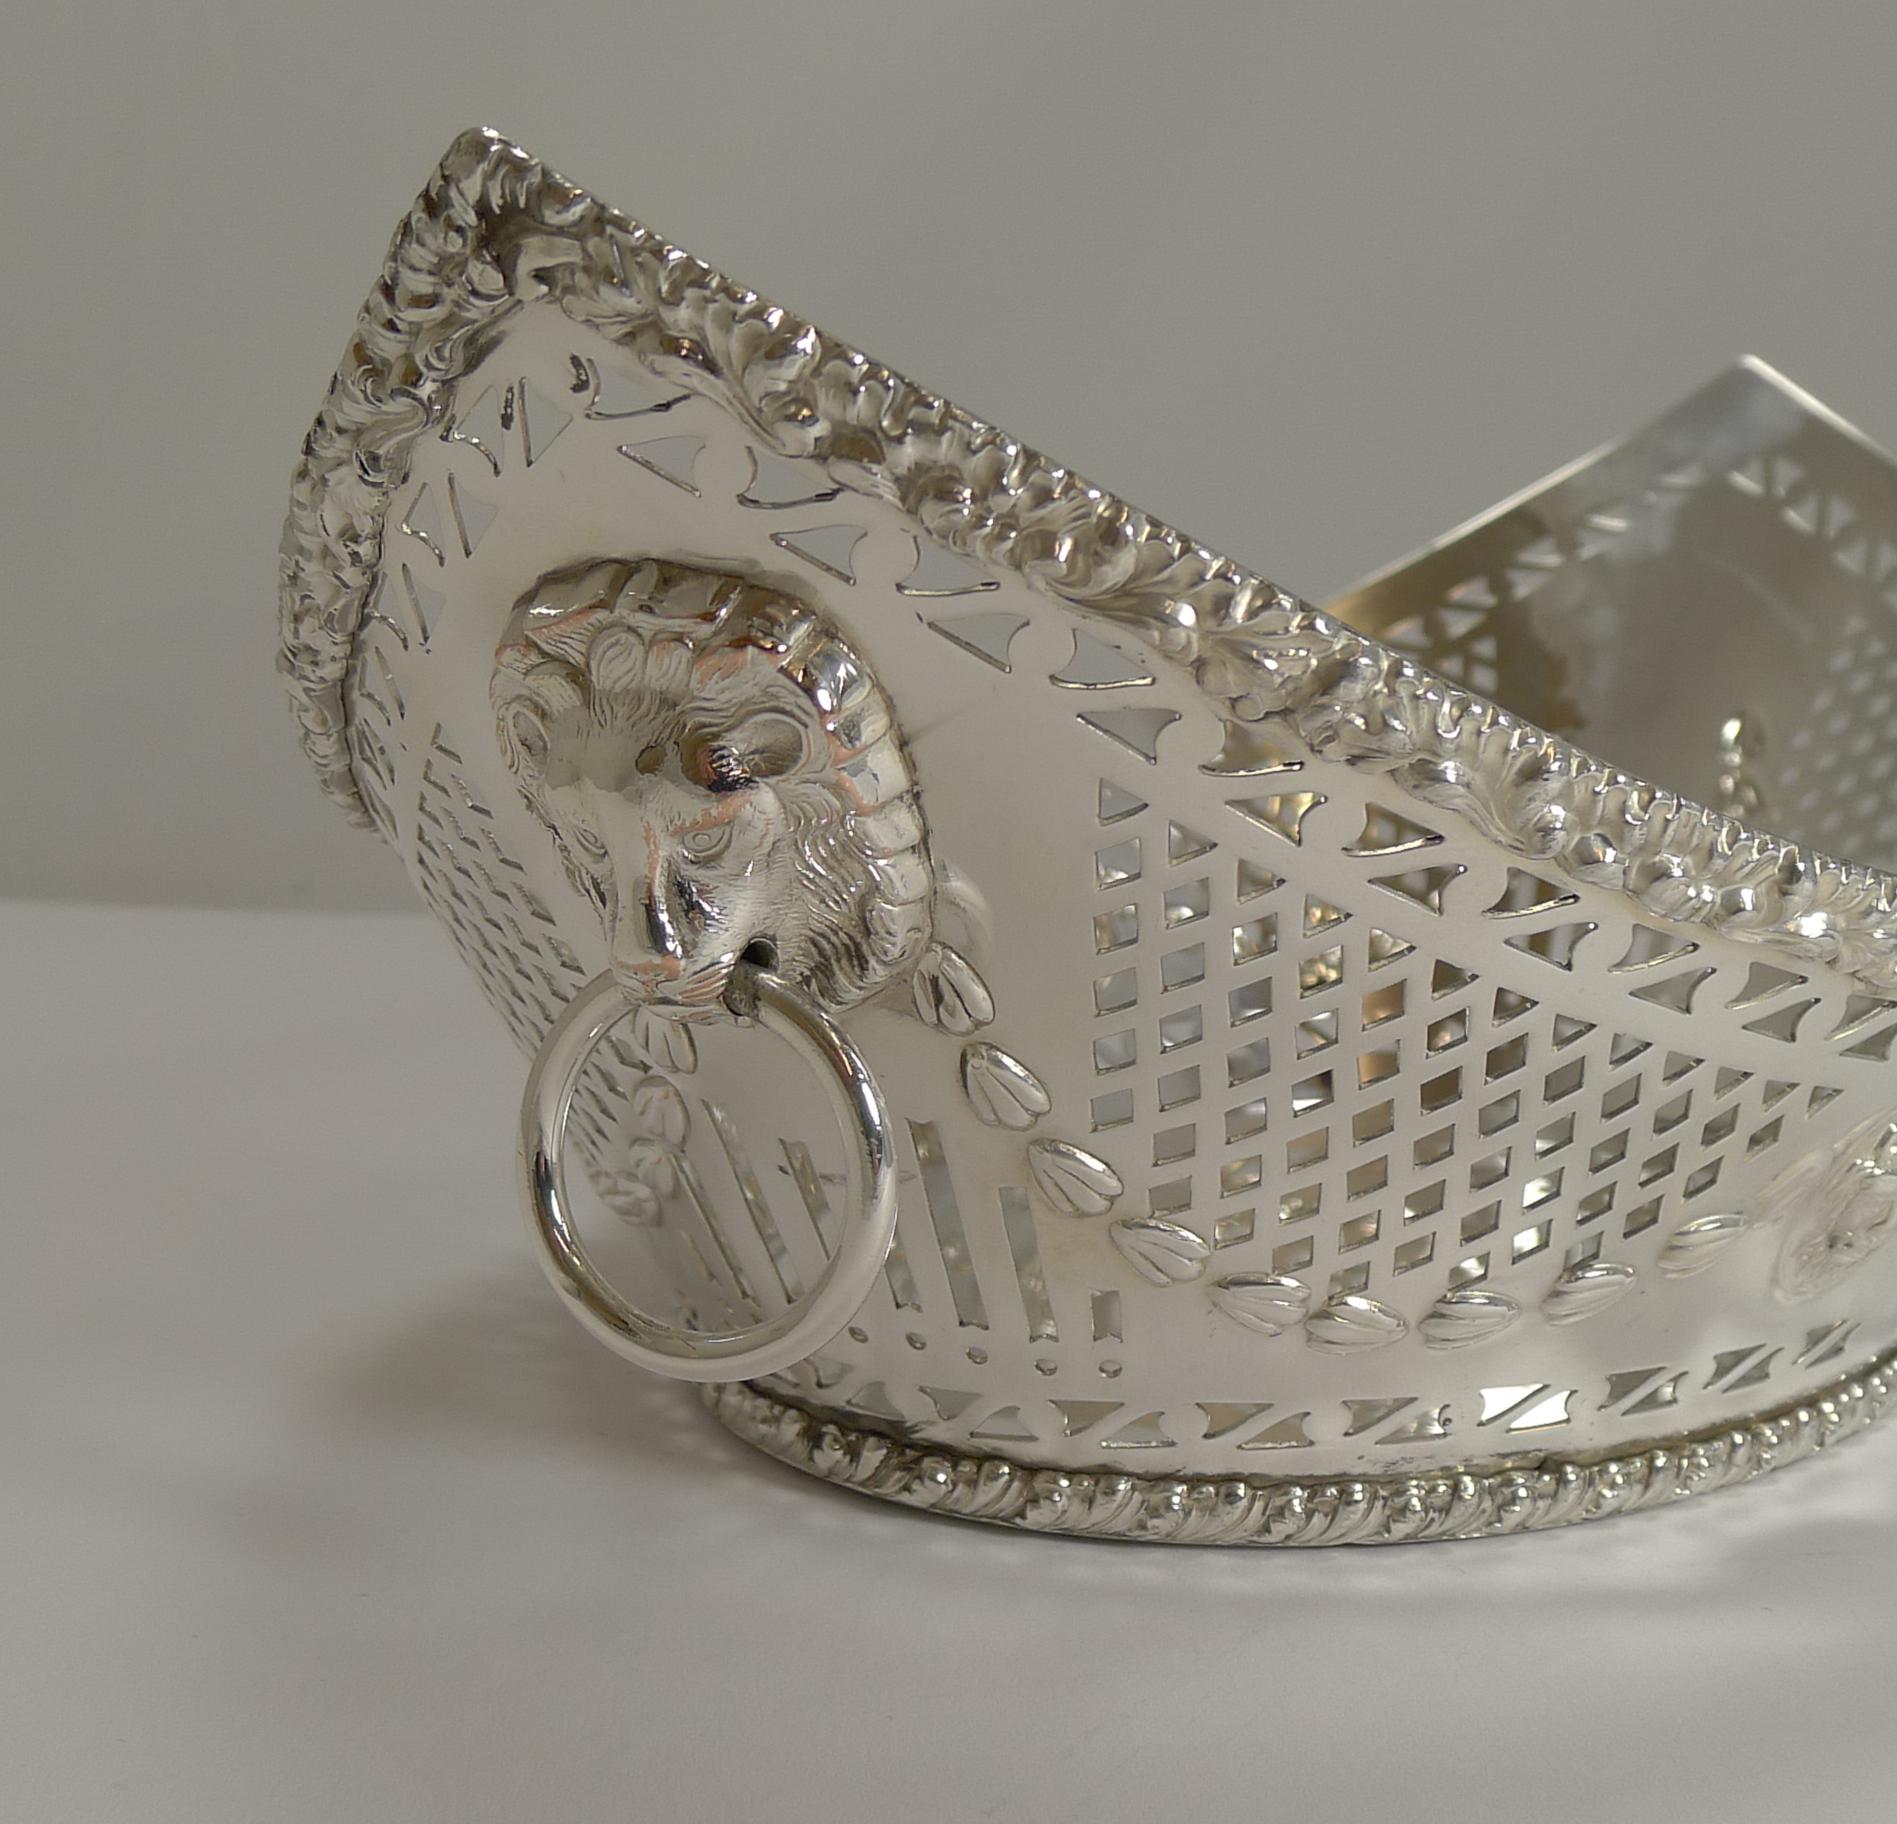 Edwardian Grand Large Antique English Silver Plated Bread Basket, circa 1900